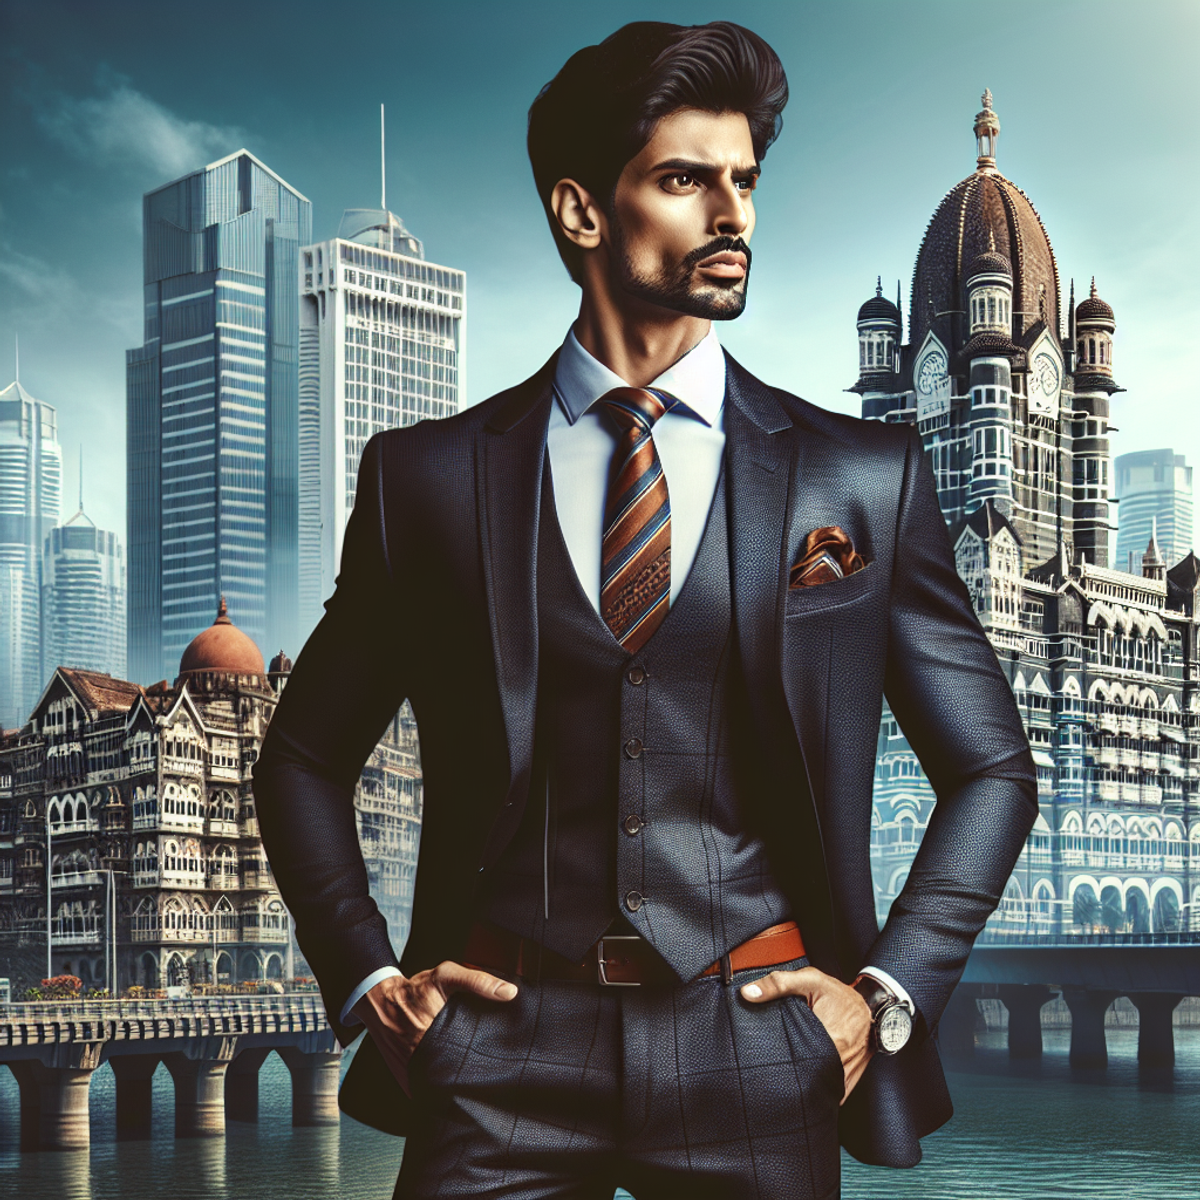 A confident Middle-Eastern male loan consultant in a suit and tie, standing in Mumbai with a secure grip on a briefcase, exuding trust and expertise amidst the vibrant cityscape.